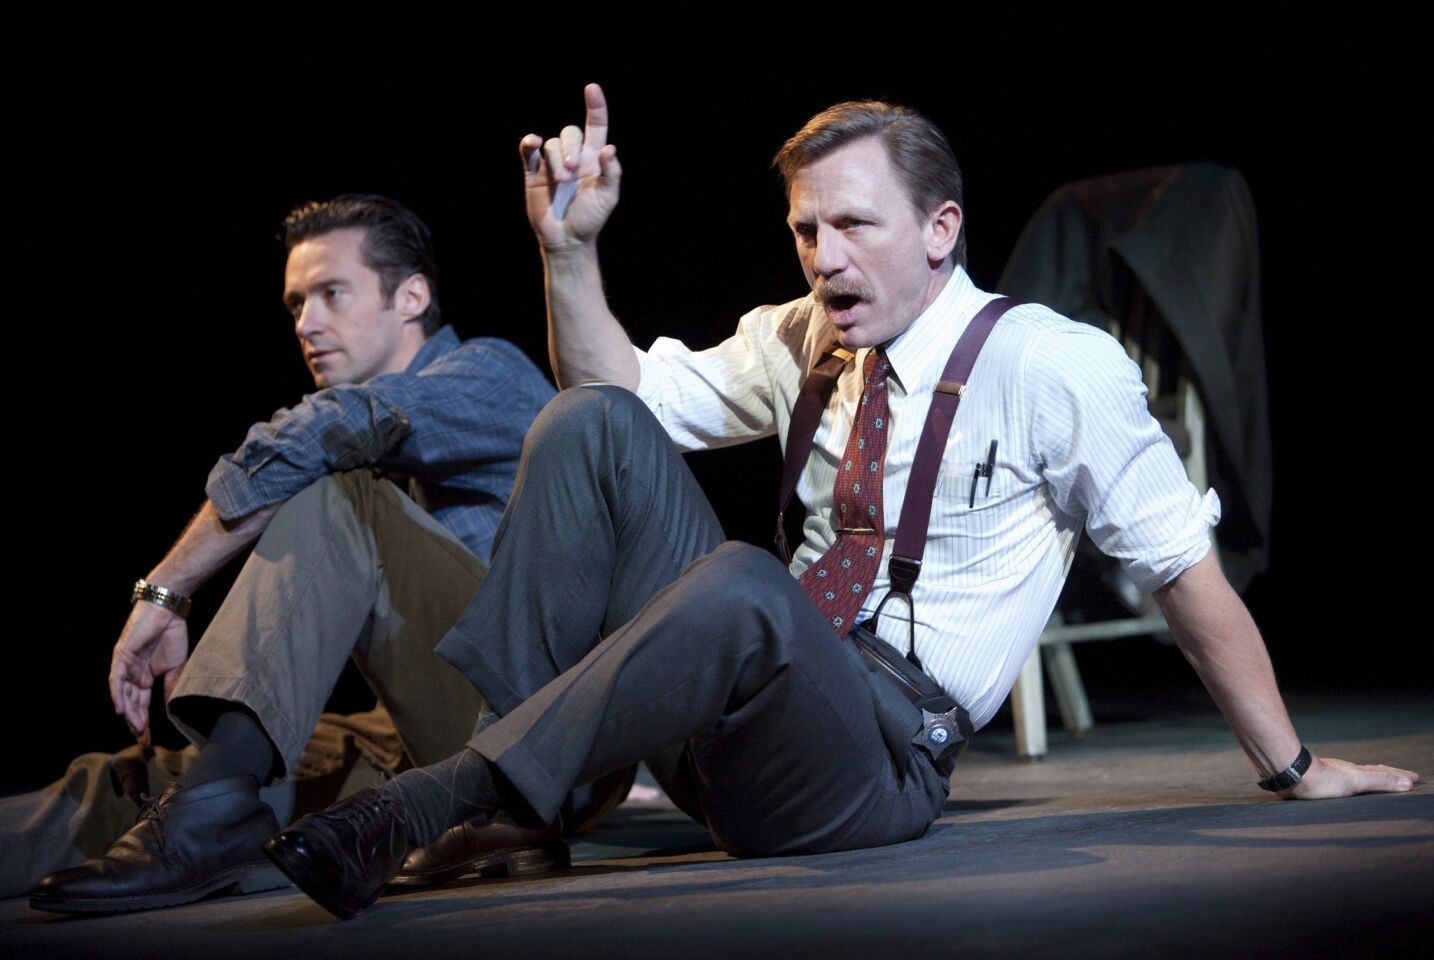 Daniel Craig and Hugh Jackman, both with impressive stage and screen credits, starred in Keith Huff's "A Steady Rain." The two-person play, which cast the duo as a pair of cops, opened Sept. 29, 2009.